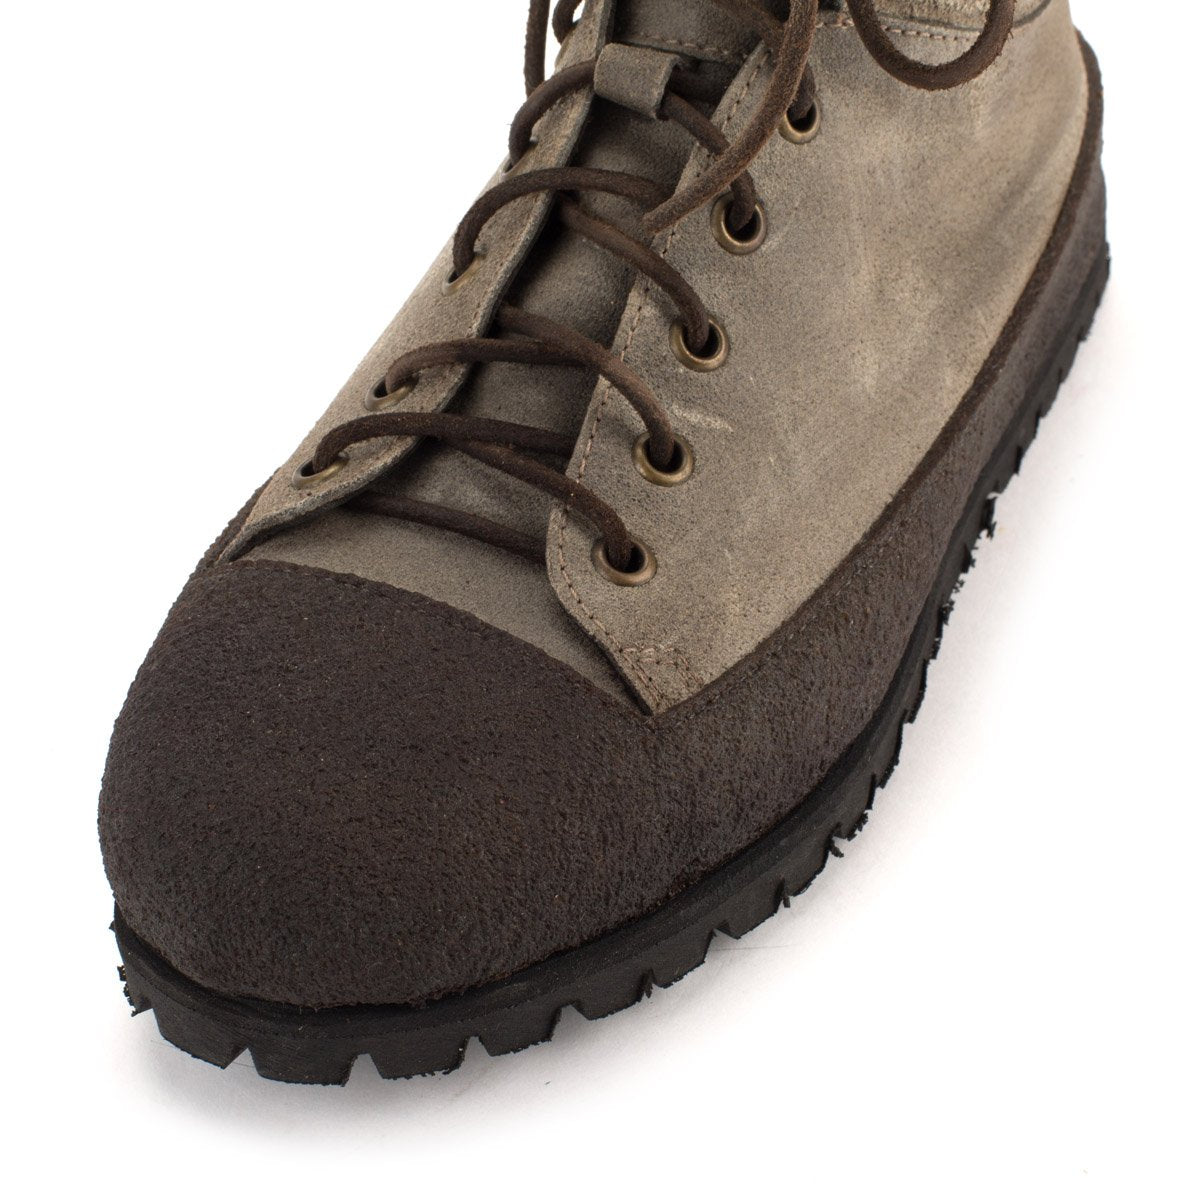 CR 24 WATER PROOF SUEDE BOOTS – Grey